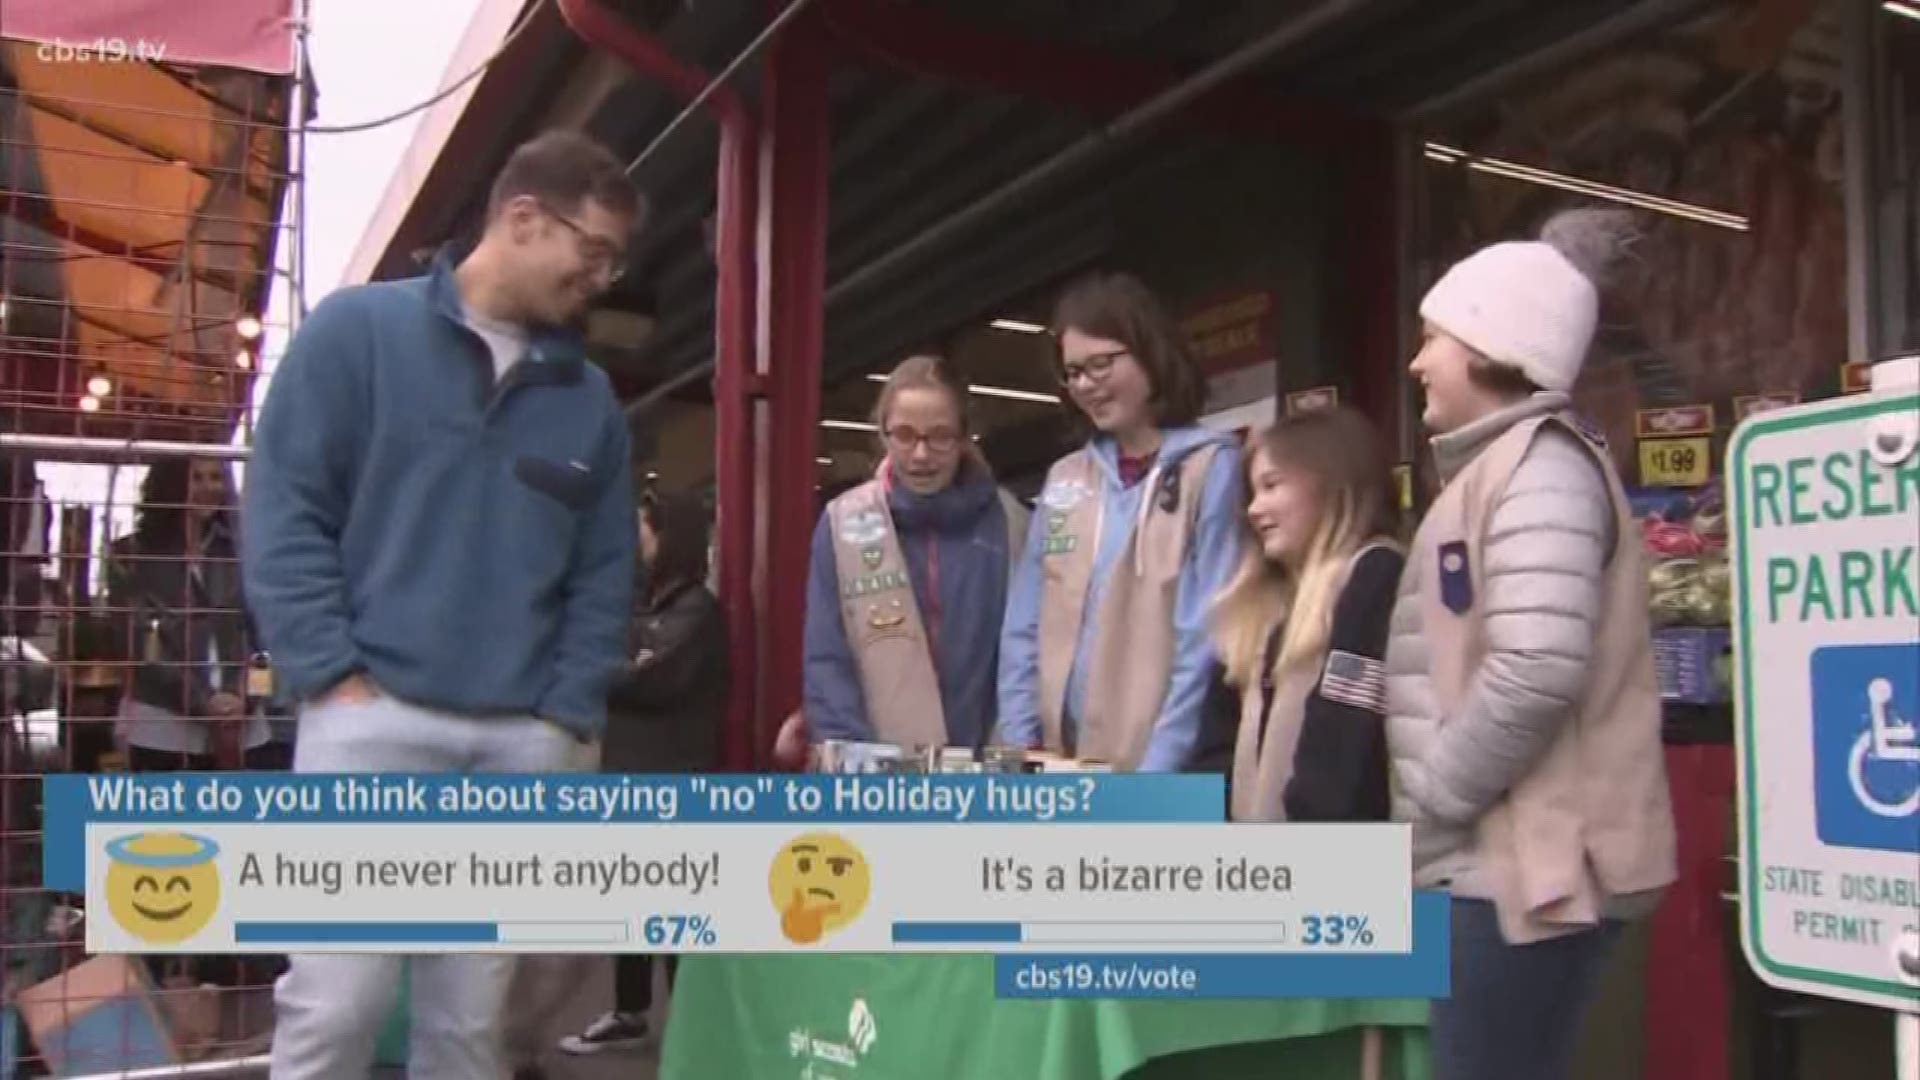 The Girl Scouts suggest no hugs for the holidays.